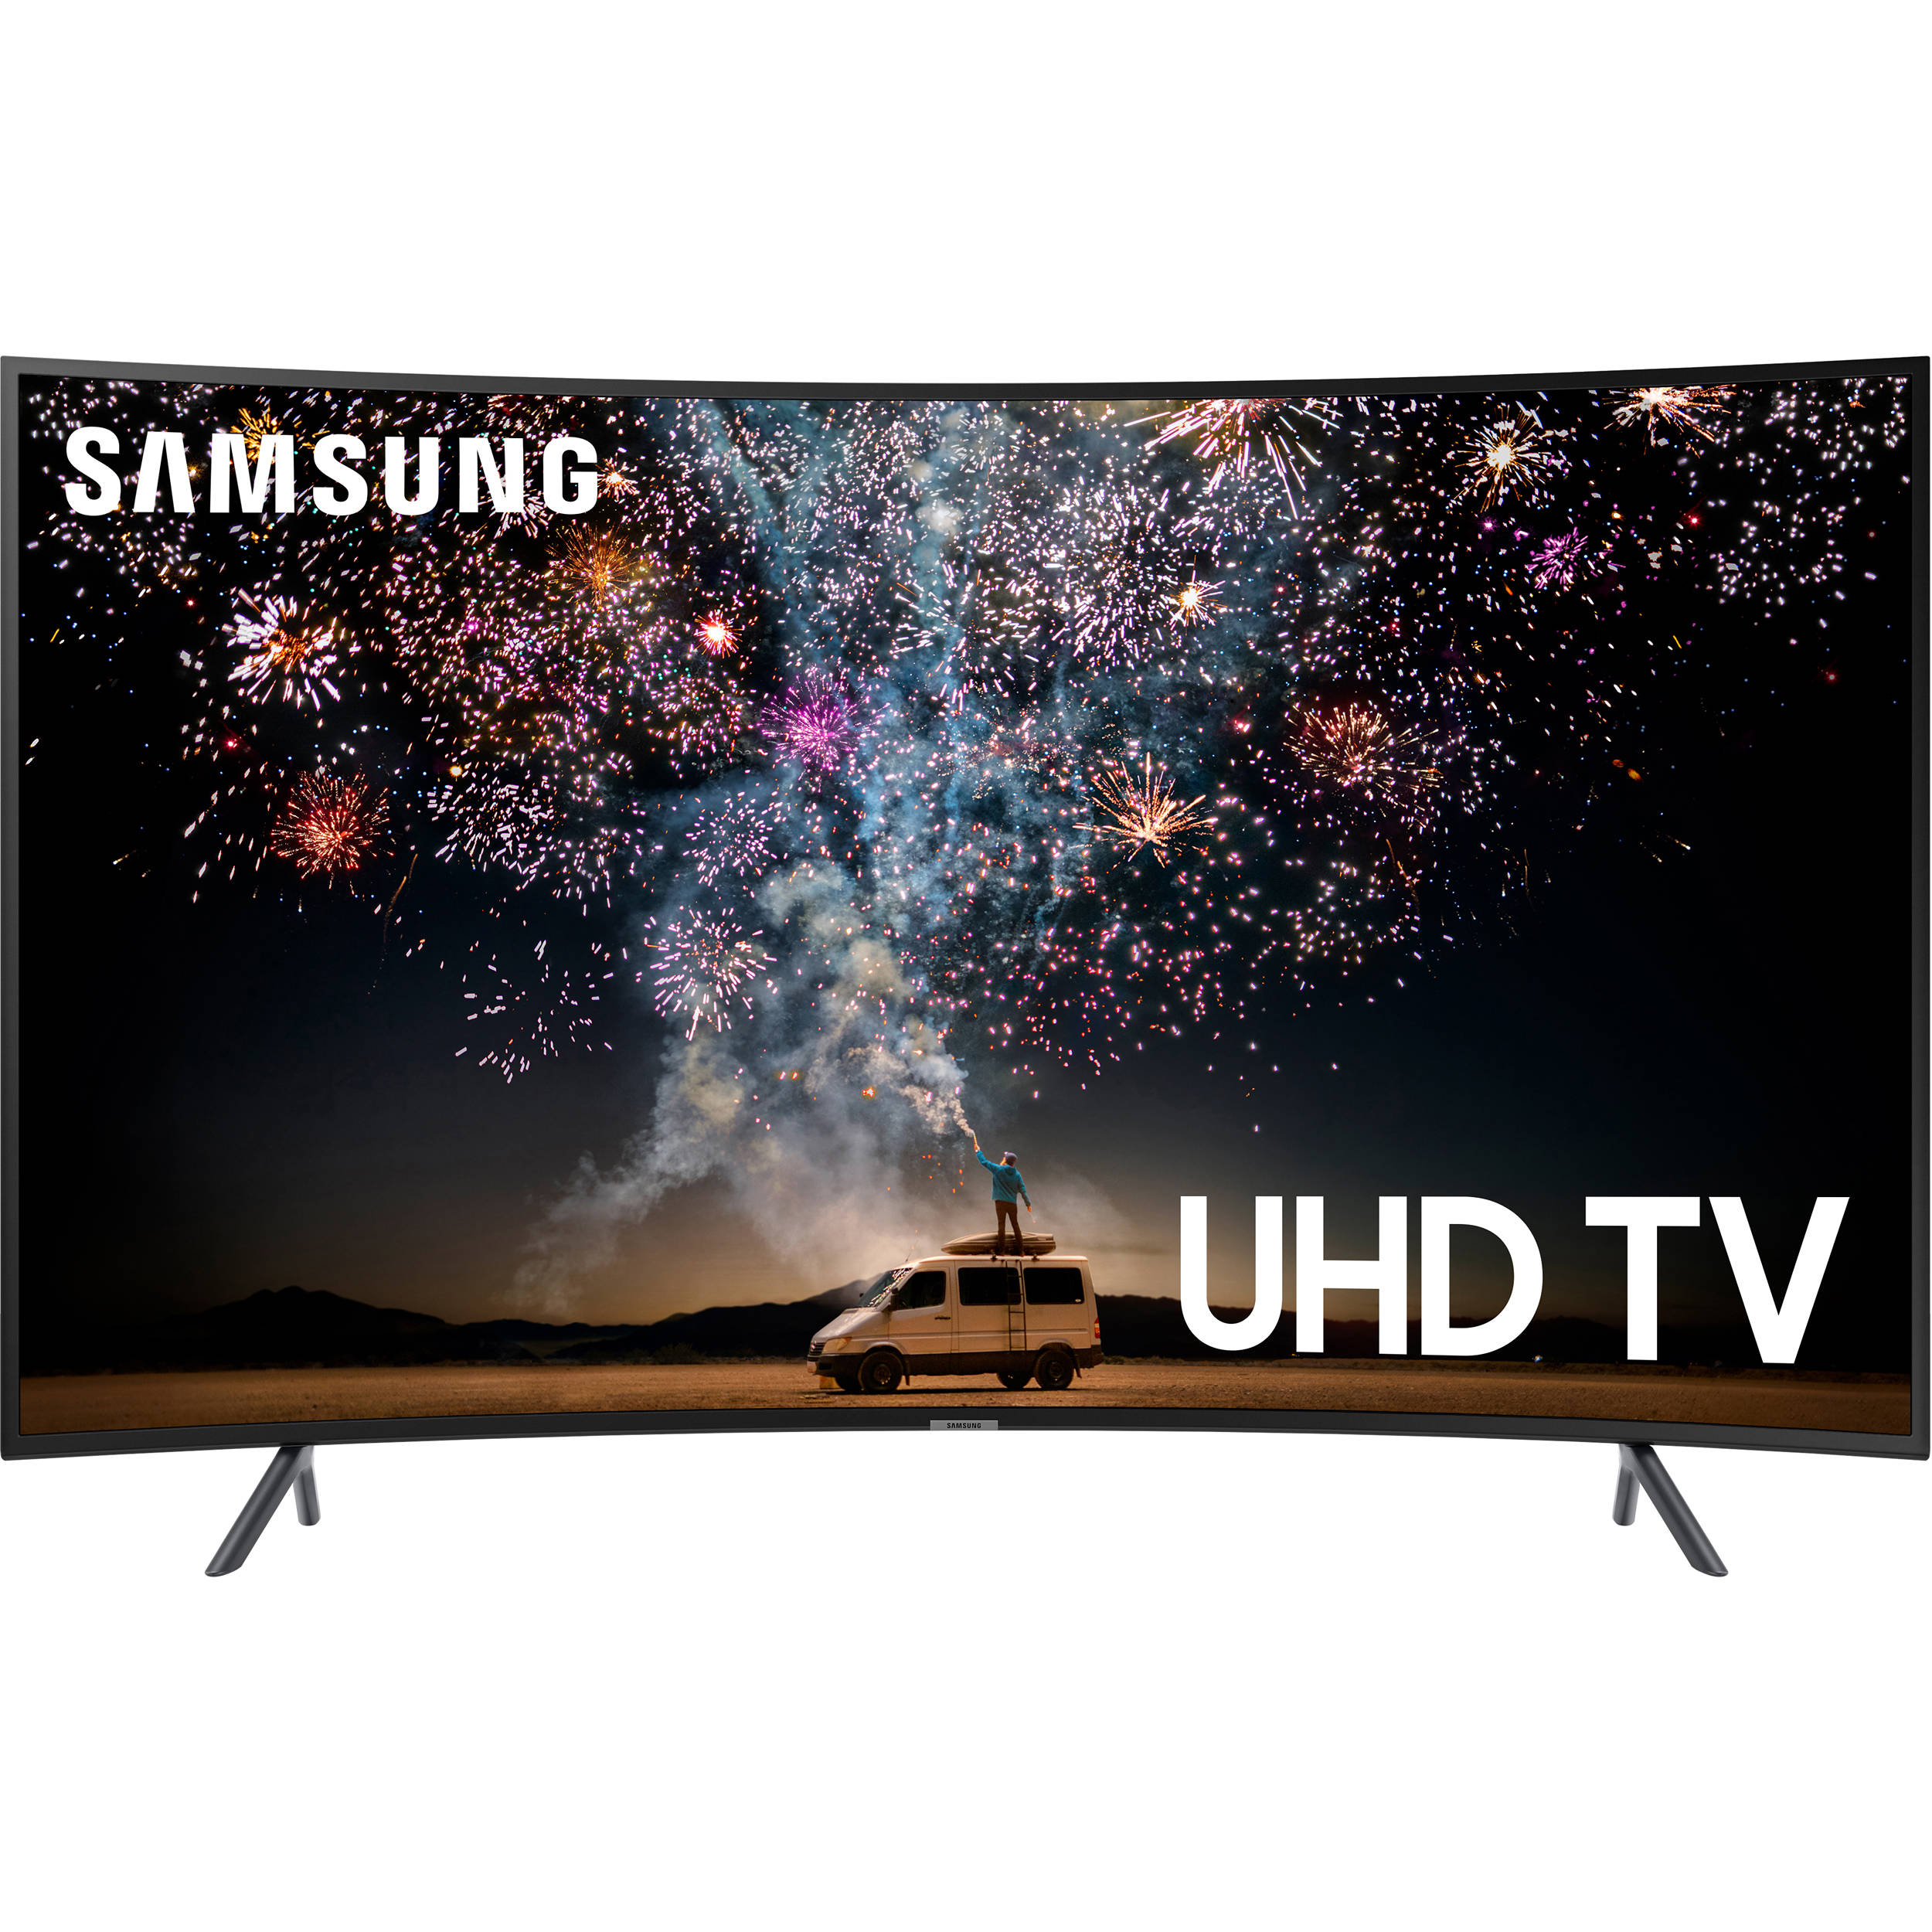 Top 20 Led Tv Brands In India With Price List Updated